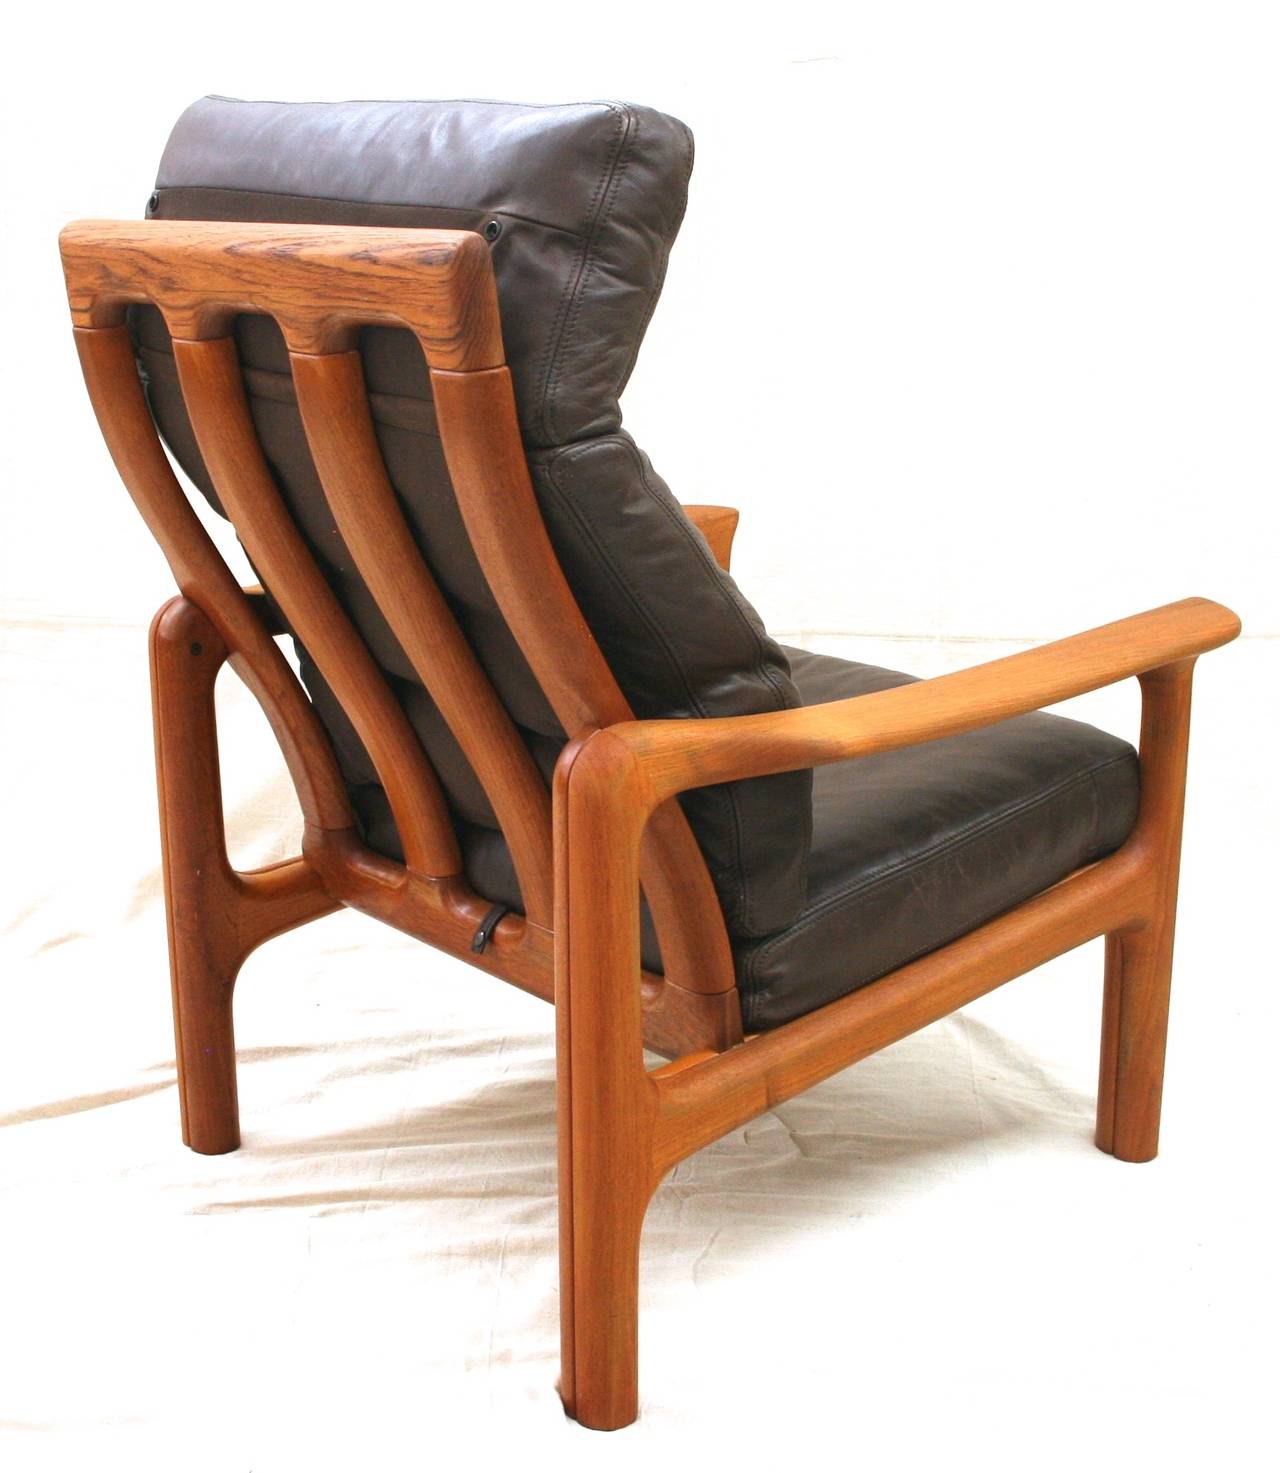 Mid-Century Modern Pair of Teak and Leather Danish Modern High Back Lounge Chairs, circa 1970 For Sale